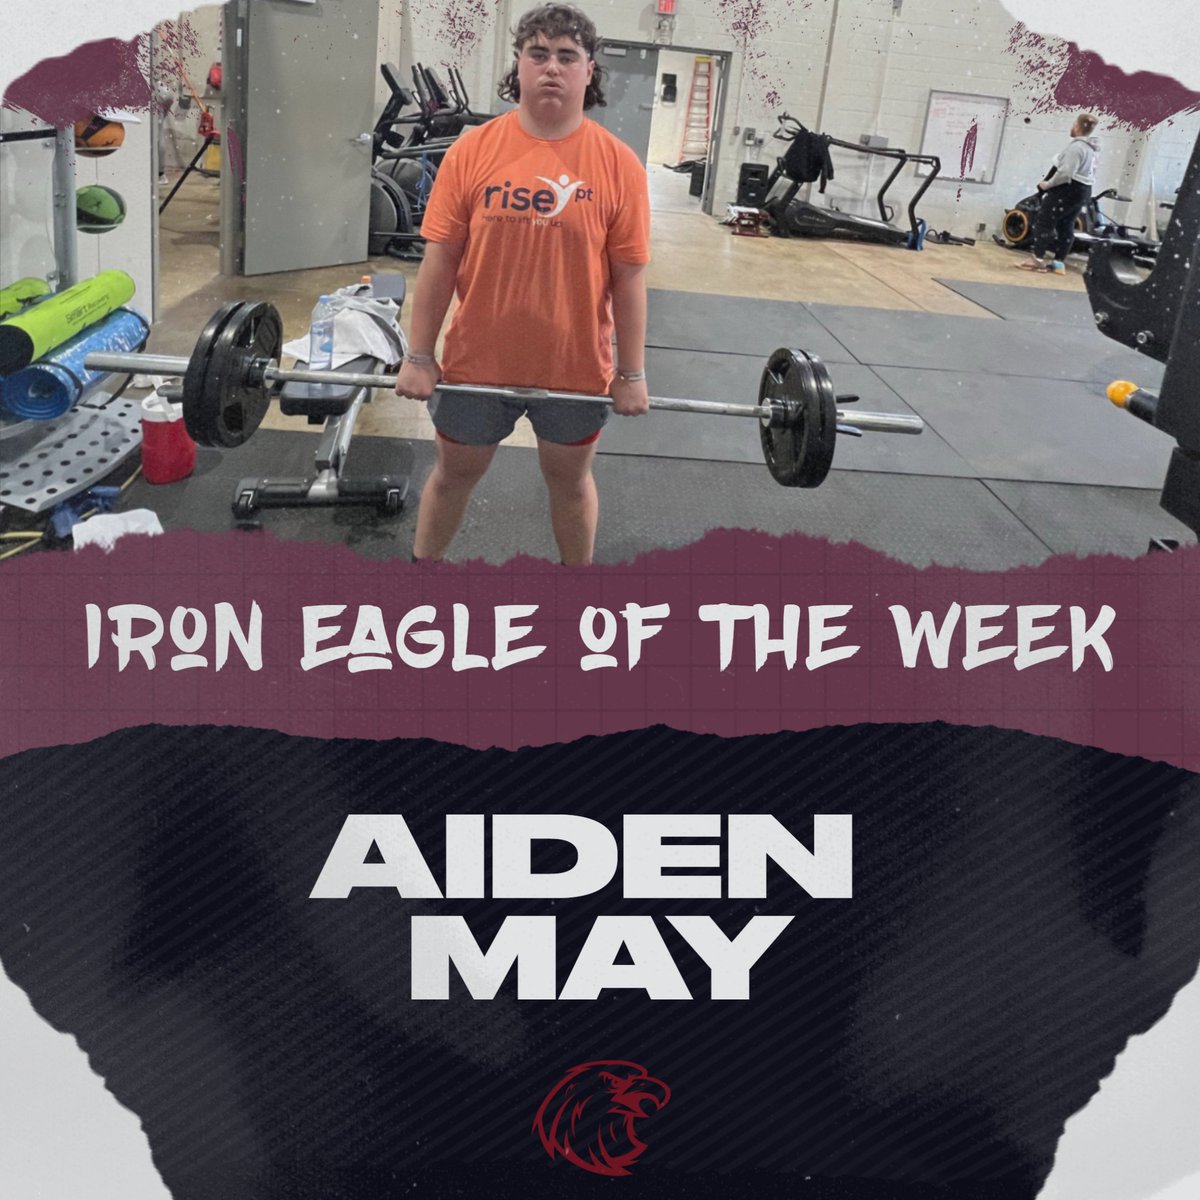 Congrats to our Iron Eagle of the week, Aiden May!